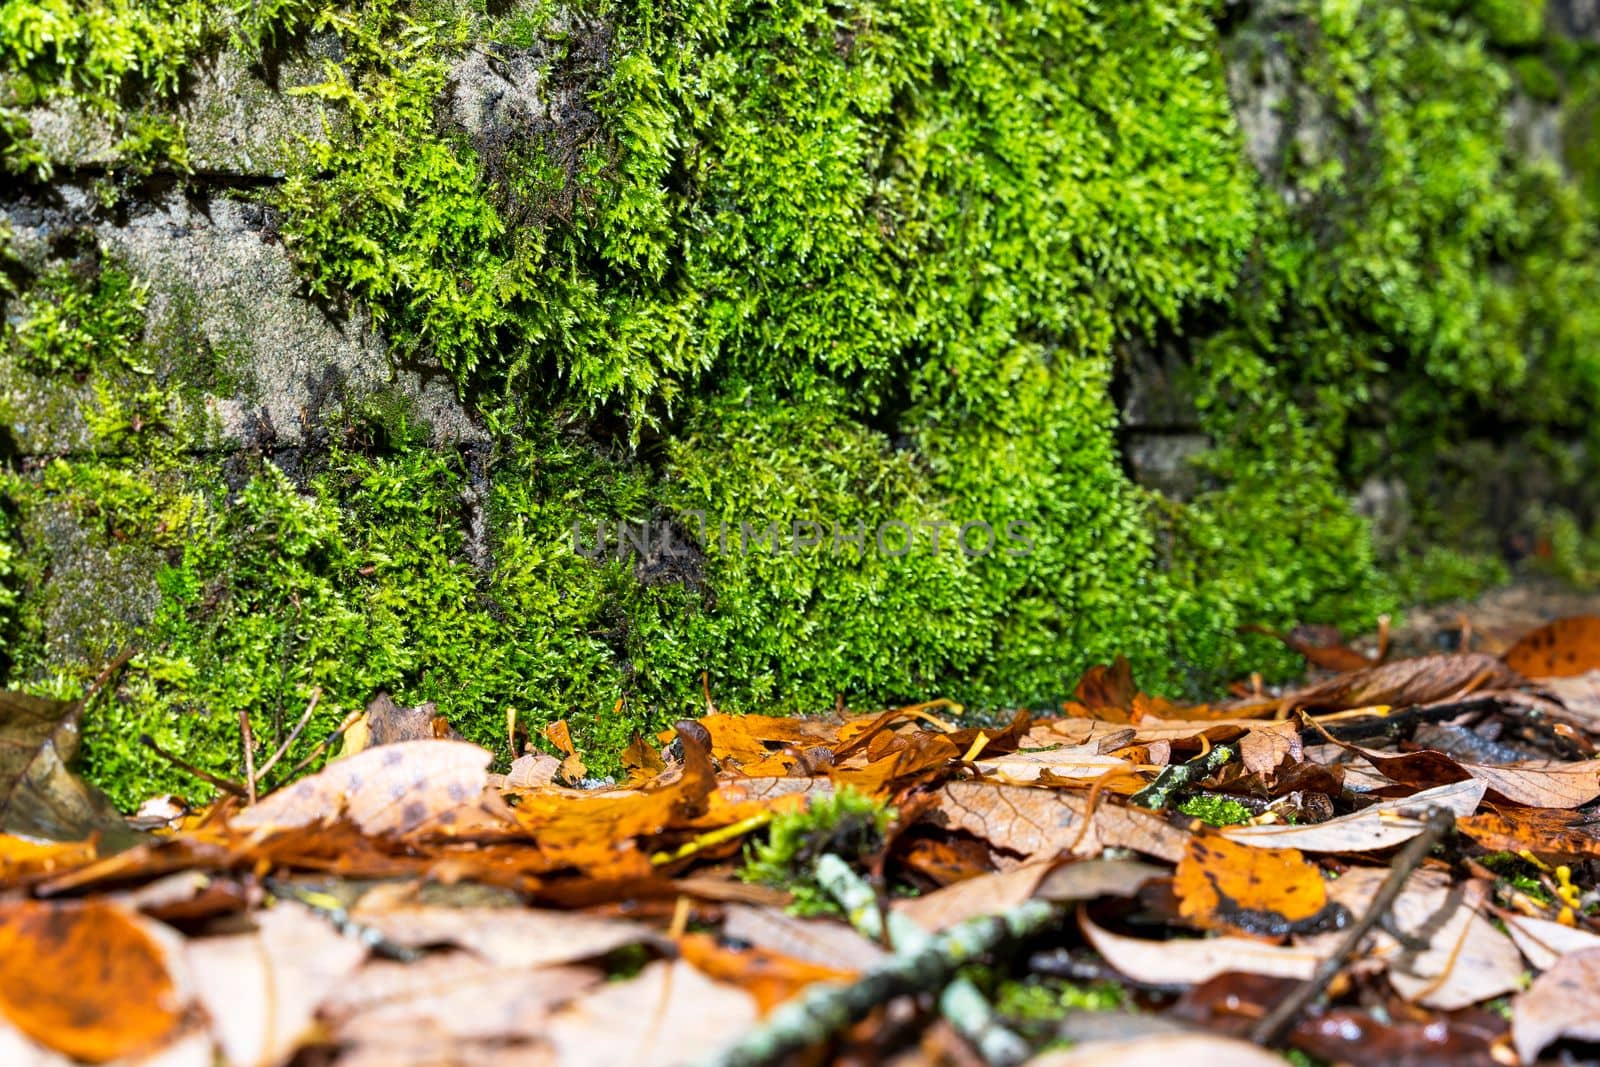 the background is green moss on a stone wall and yellow fallen leaves. Dry fallen leaves and overgrown green moss on an old brick wall in autumn.